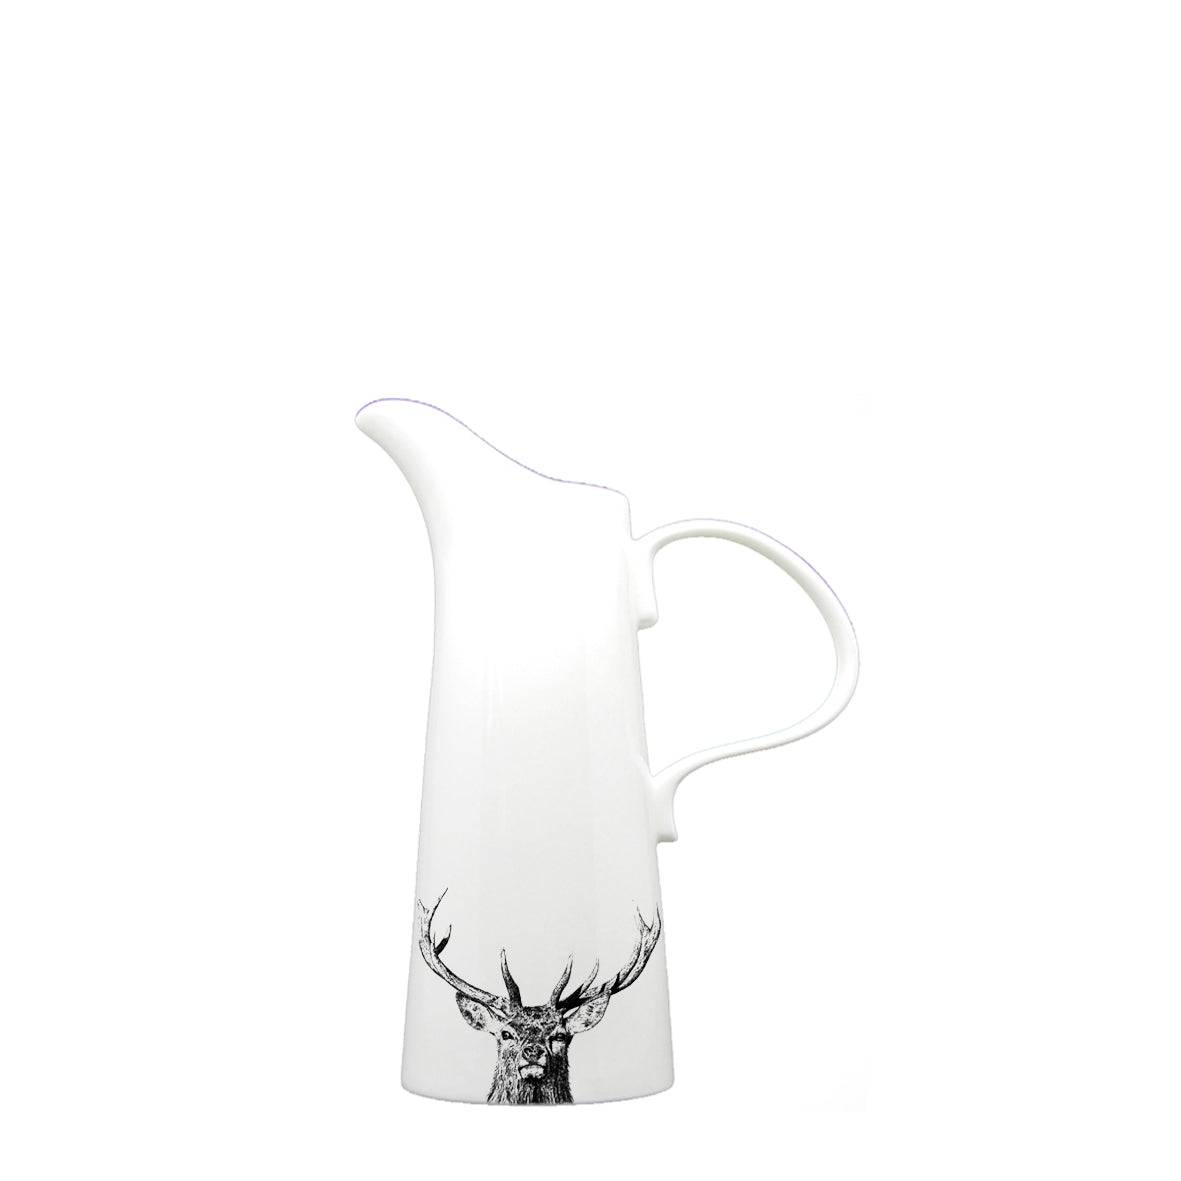 Majestic Stag Jug - Medium for sale - Woodcock and Cavendish